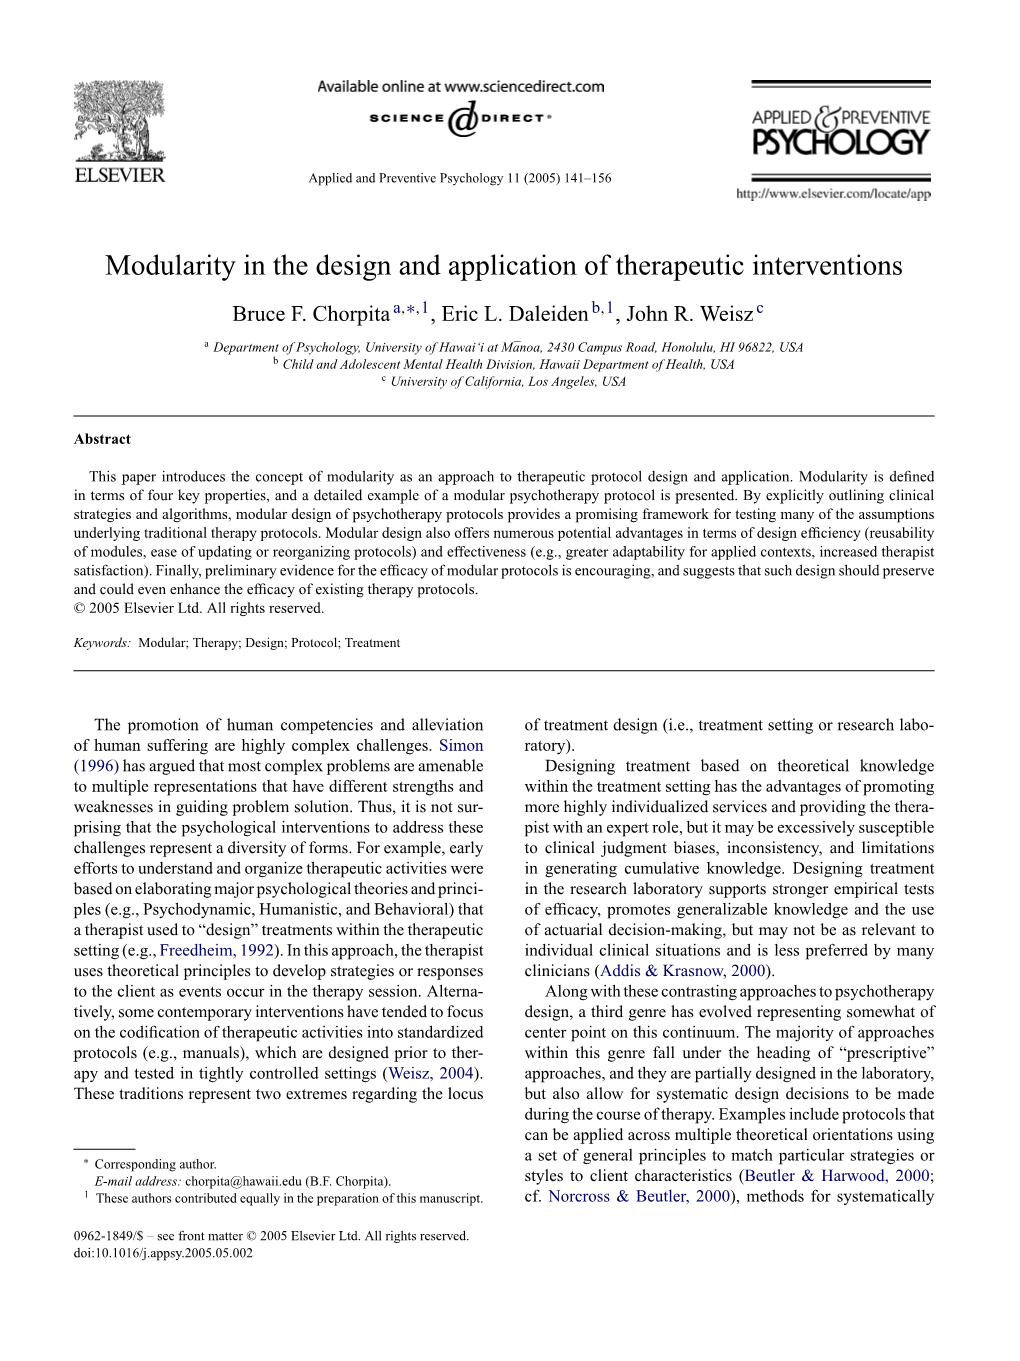 Modularity in the Design and Application of Therapeutic Interventions